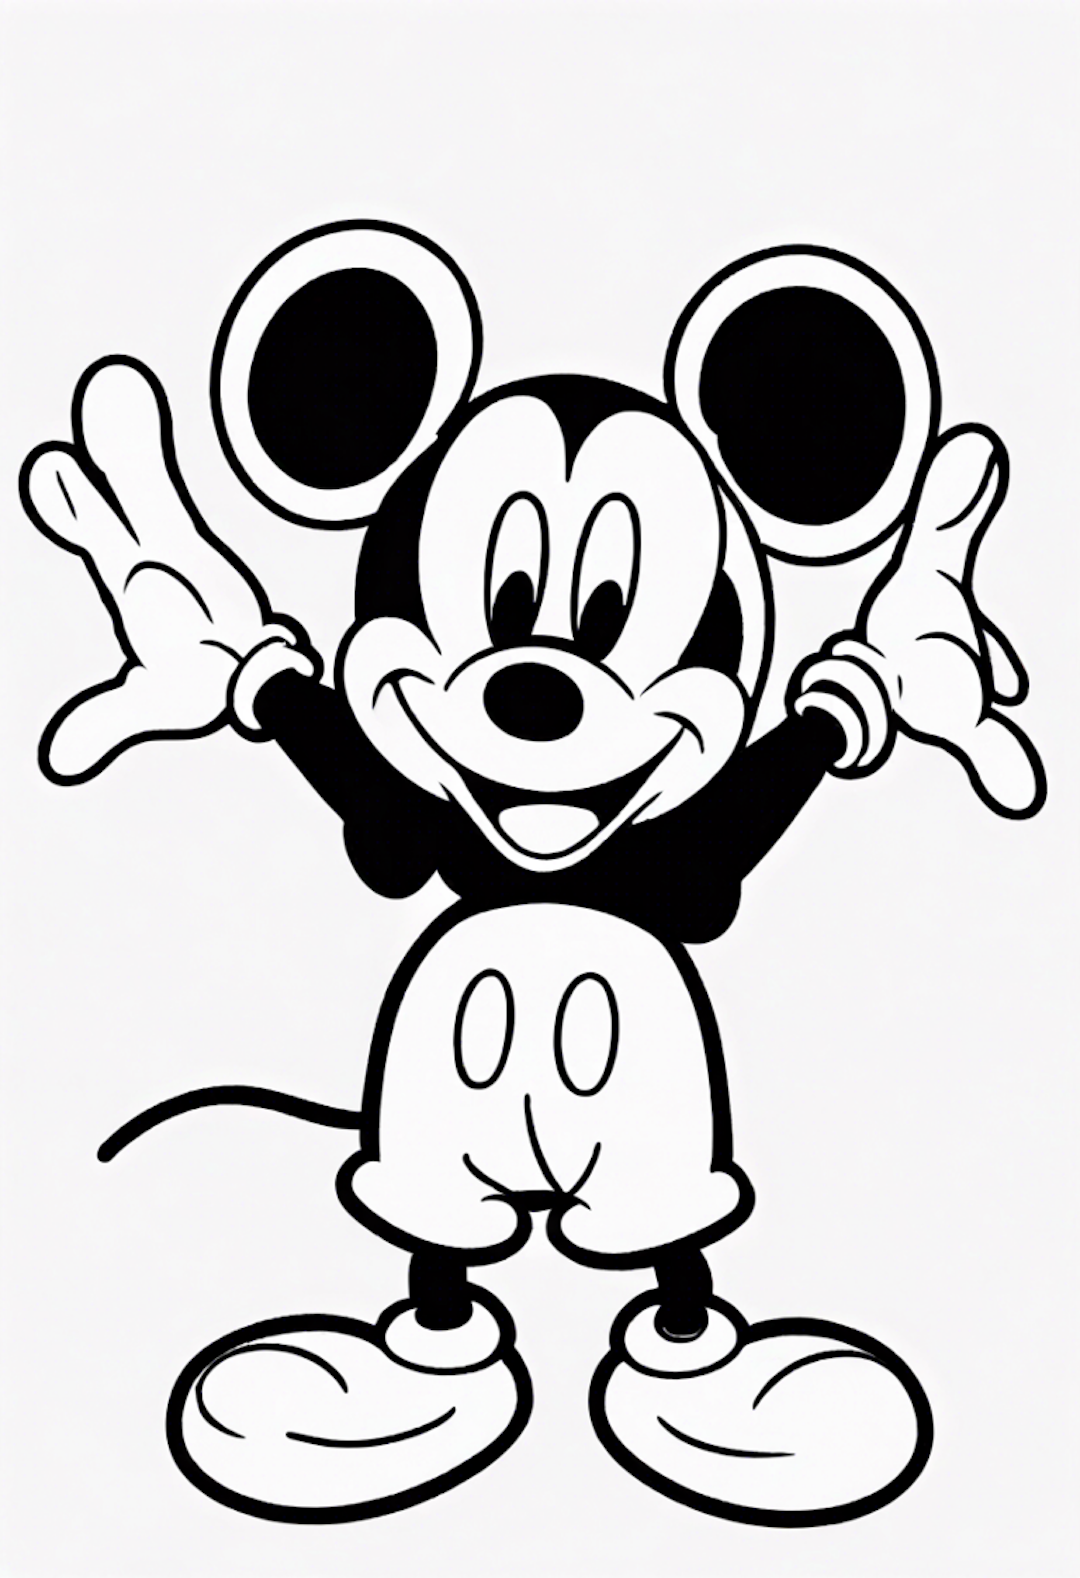 Mickey Mouse is Ready to Play! coloring pages